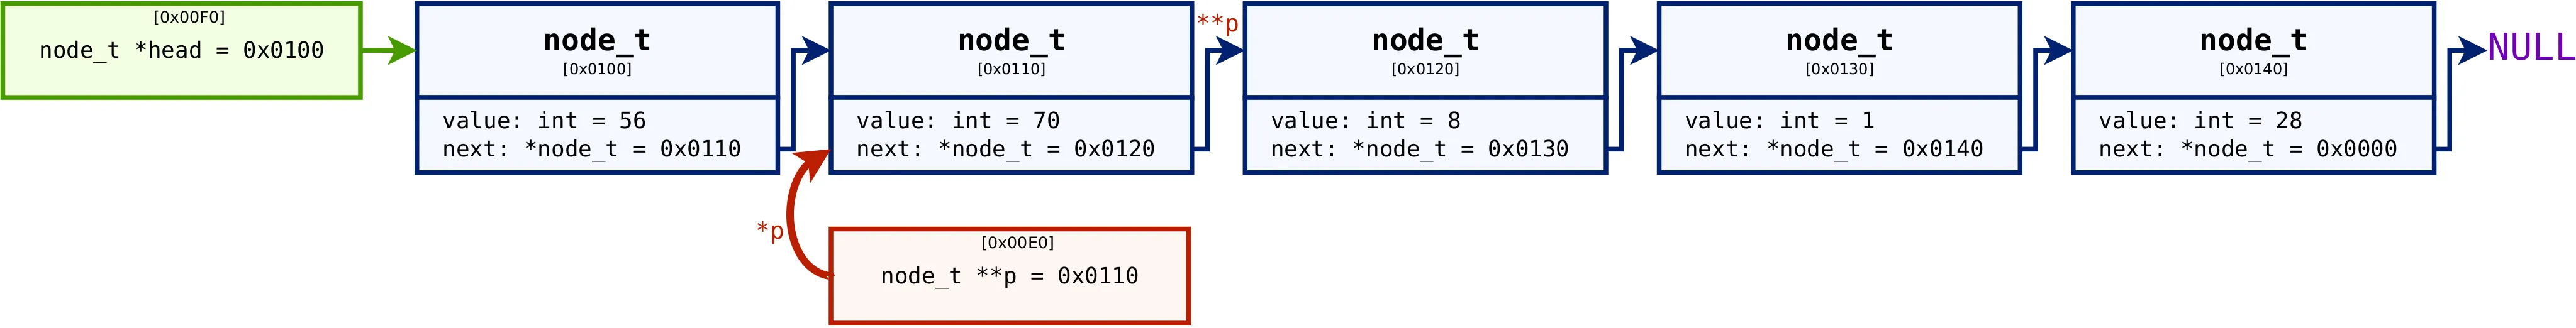 Singly-linked list example #4